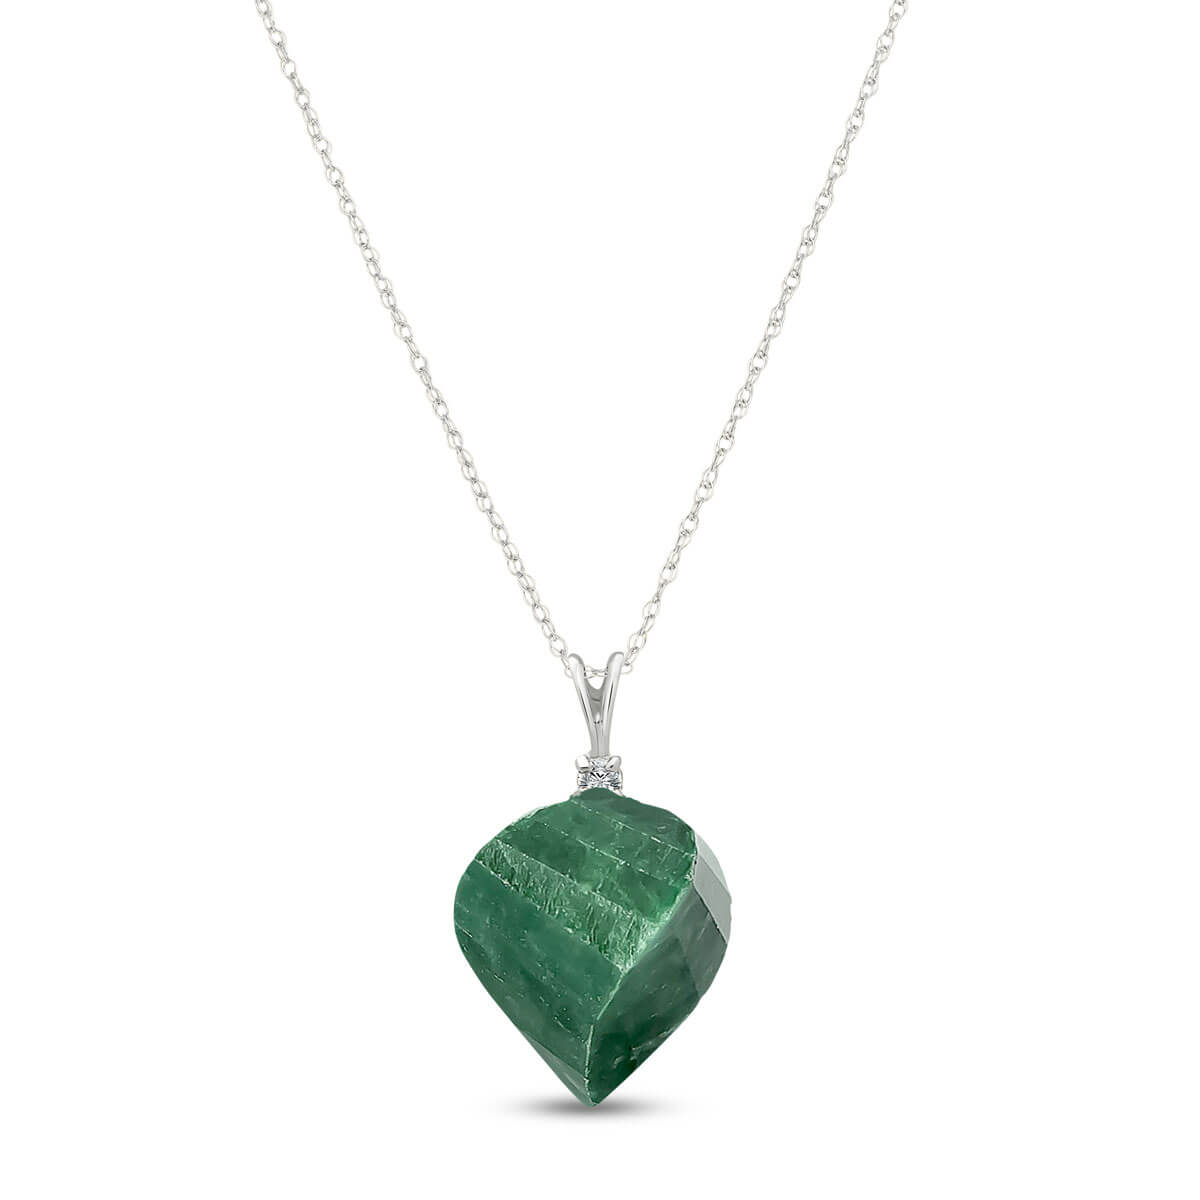 Twisted Briolette Cut Emerald Pendant Necklace 15.3 ctw in 9ct White Gold